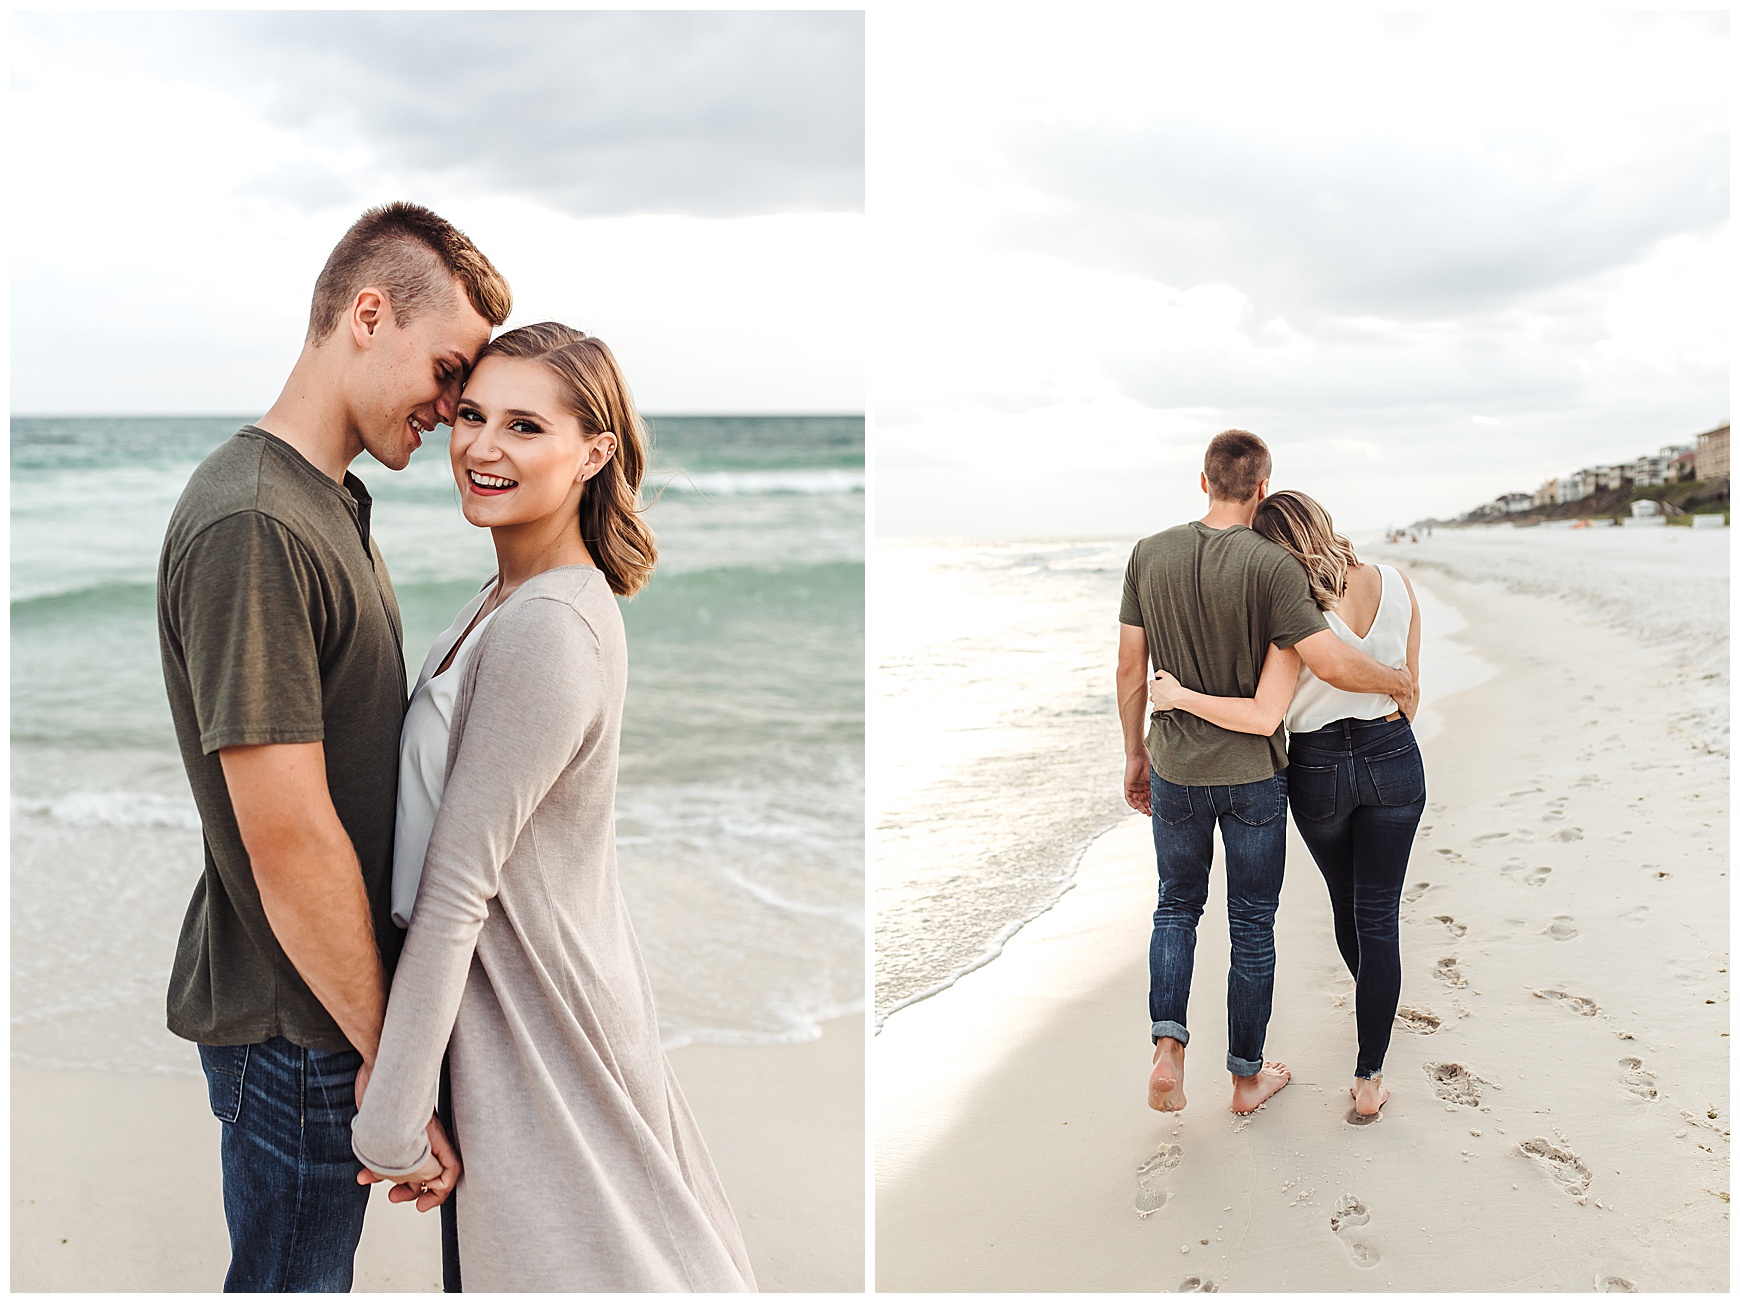 Engagement Session at the beach in South Walton 30a